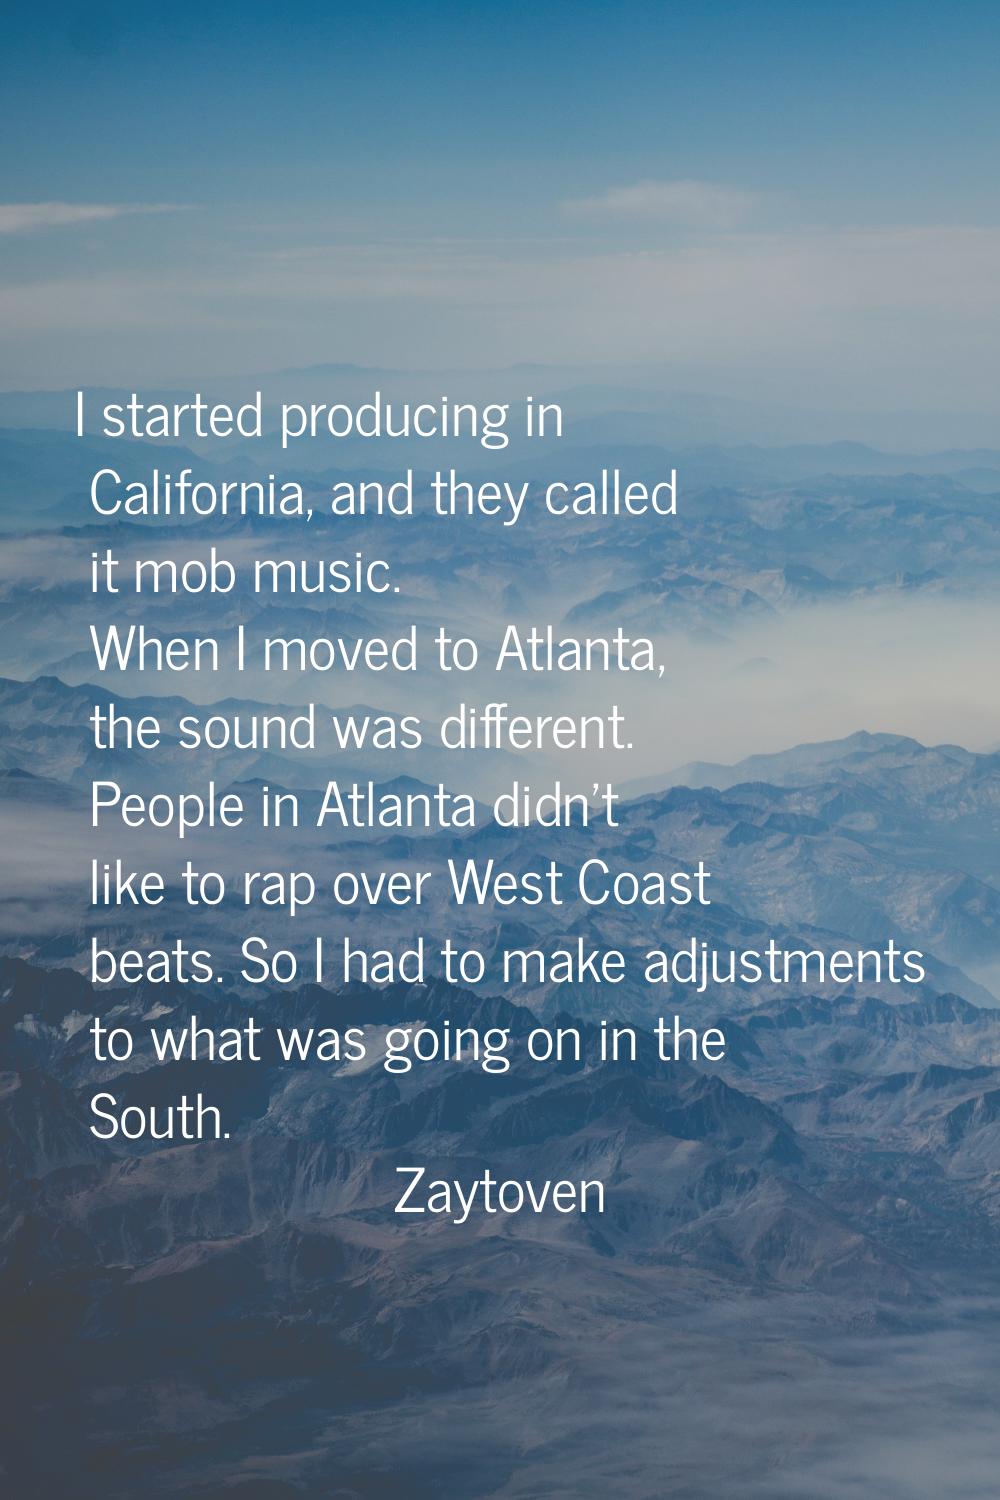 I started producing in California, and they called it mob music. When I moved to Atlanta, the sound